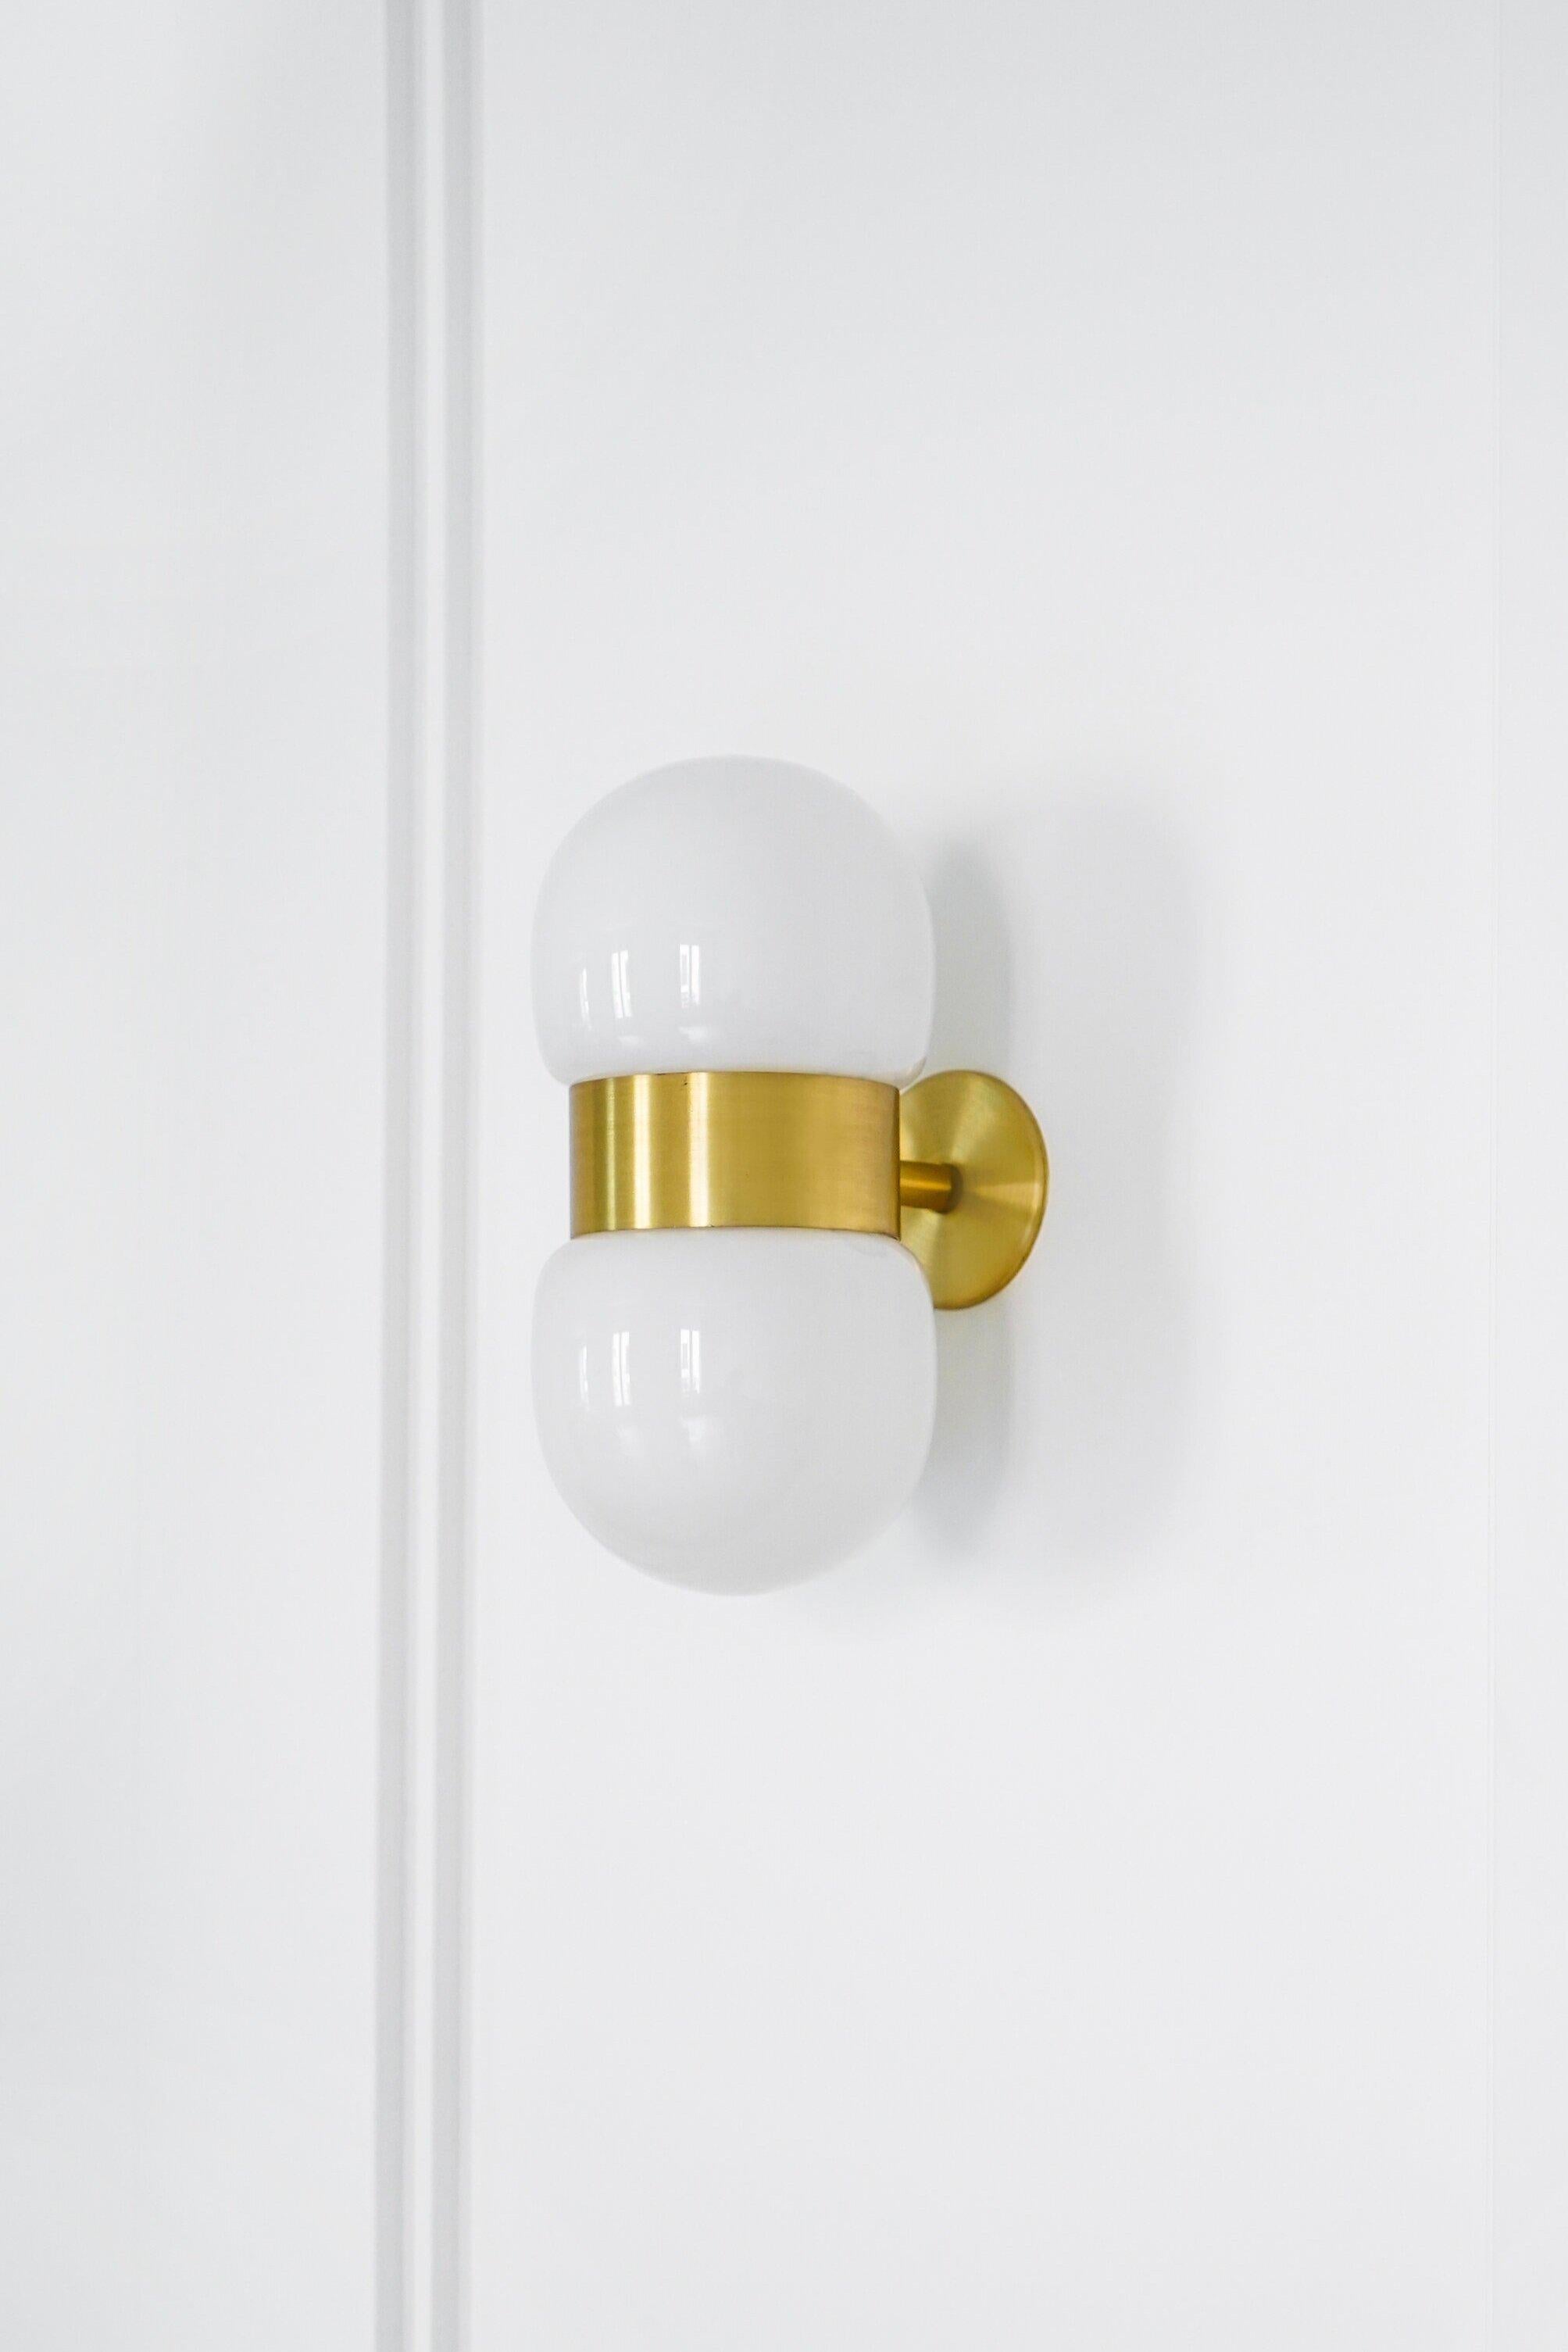 Nuvol double brass wall light by Contain
Dimensions: D10 x W23 x H15cm 
Materials: Brass, 3D printed PLA structure and matte or glossy glass.
Available in different finishes.

All our lamps can be wired according to each country. If sold to the